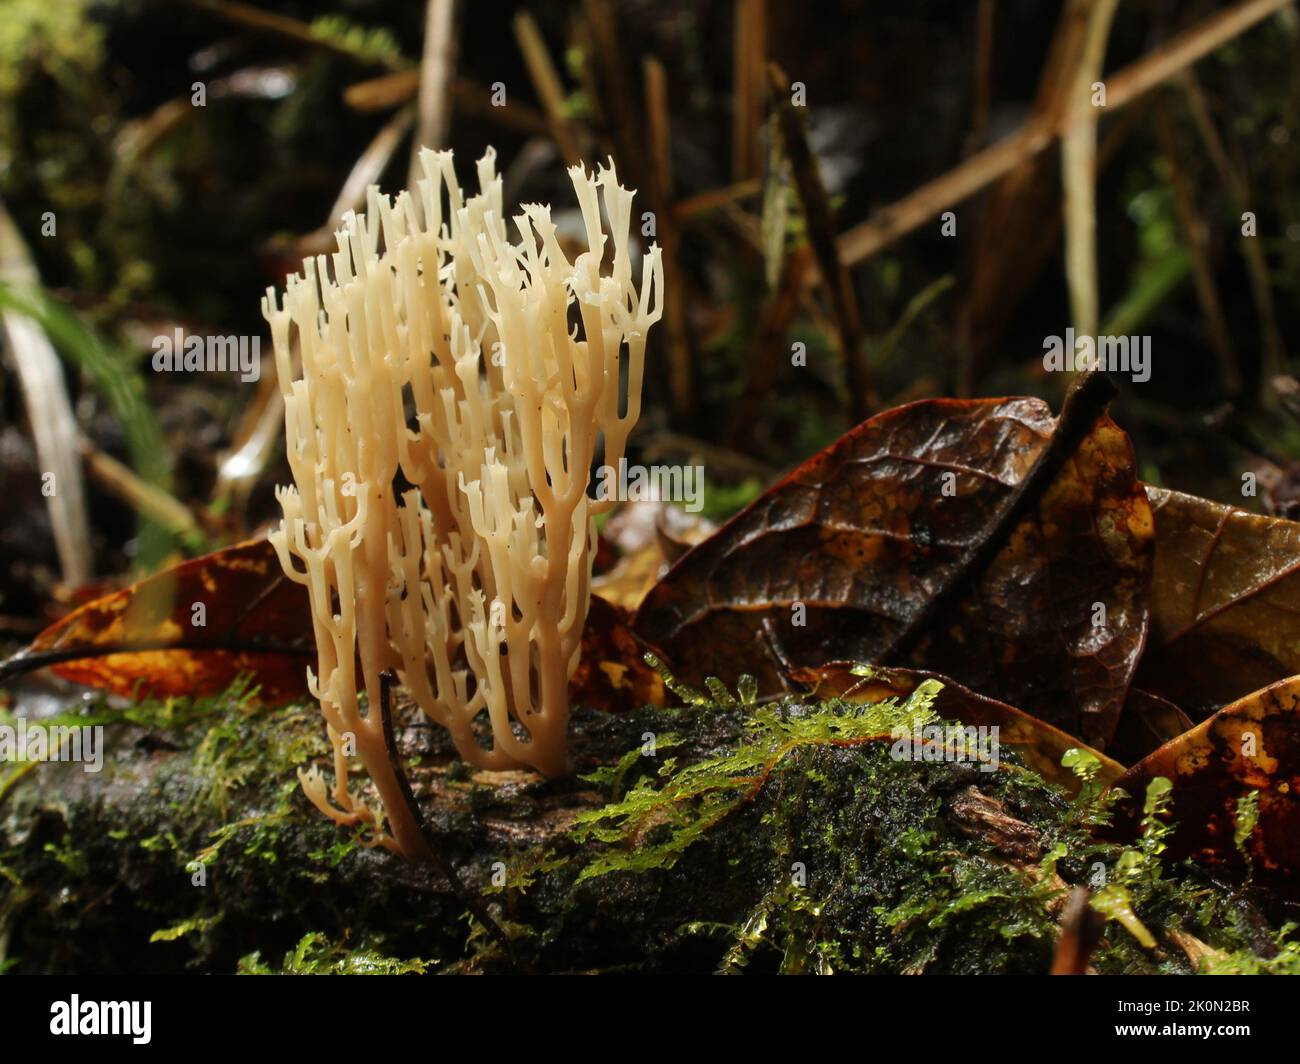 Crown-Tipped Coral (Artemyces) found in a cloud forest located in Barva Volcano, Costa Rica Stock Photo